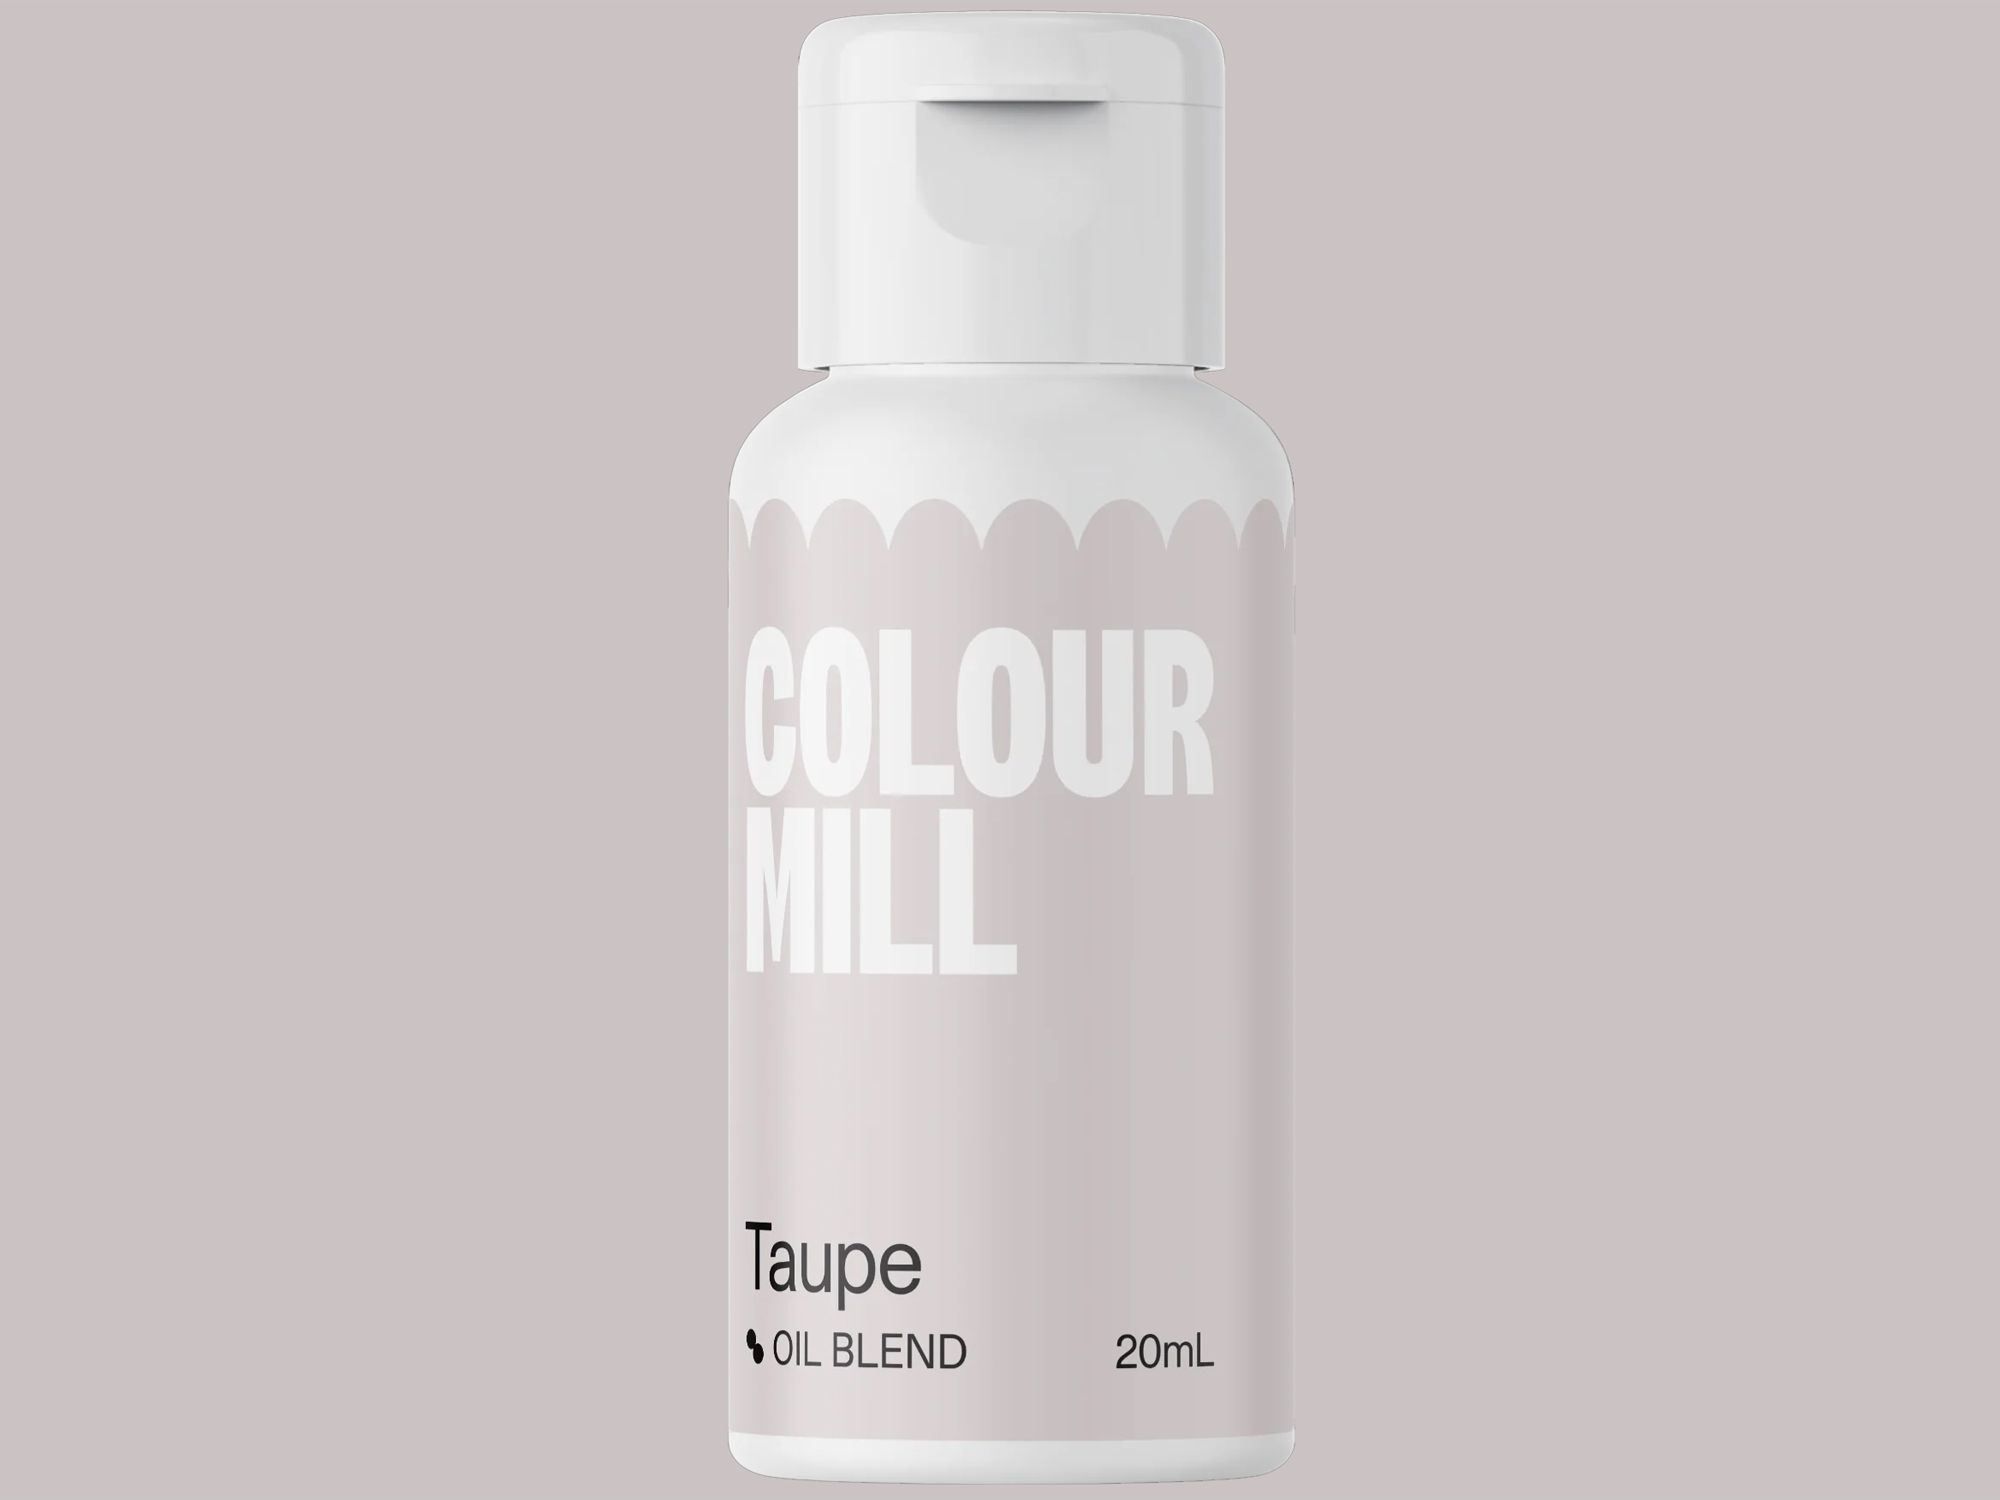 Colour Mill Taupe (Oil Blend) 20ml